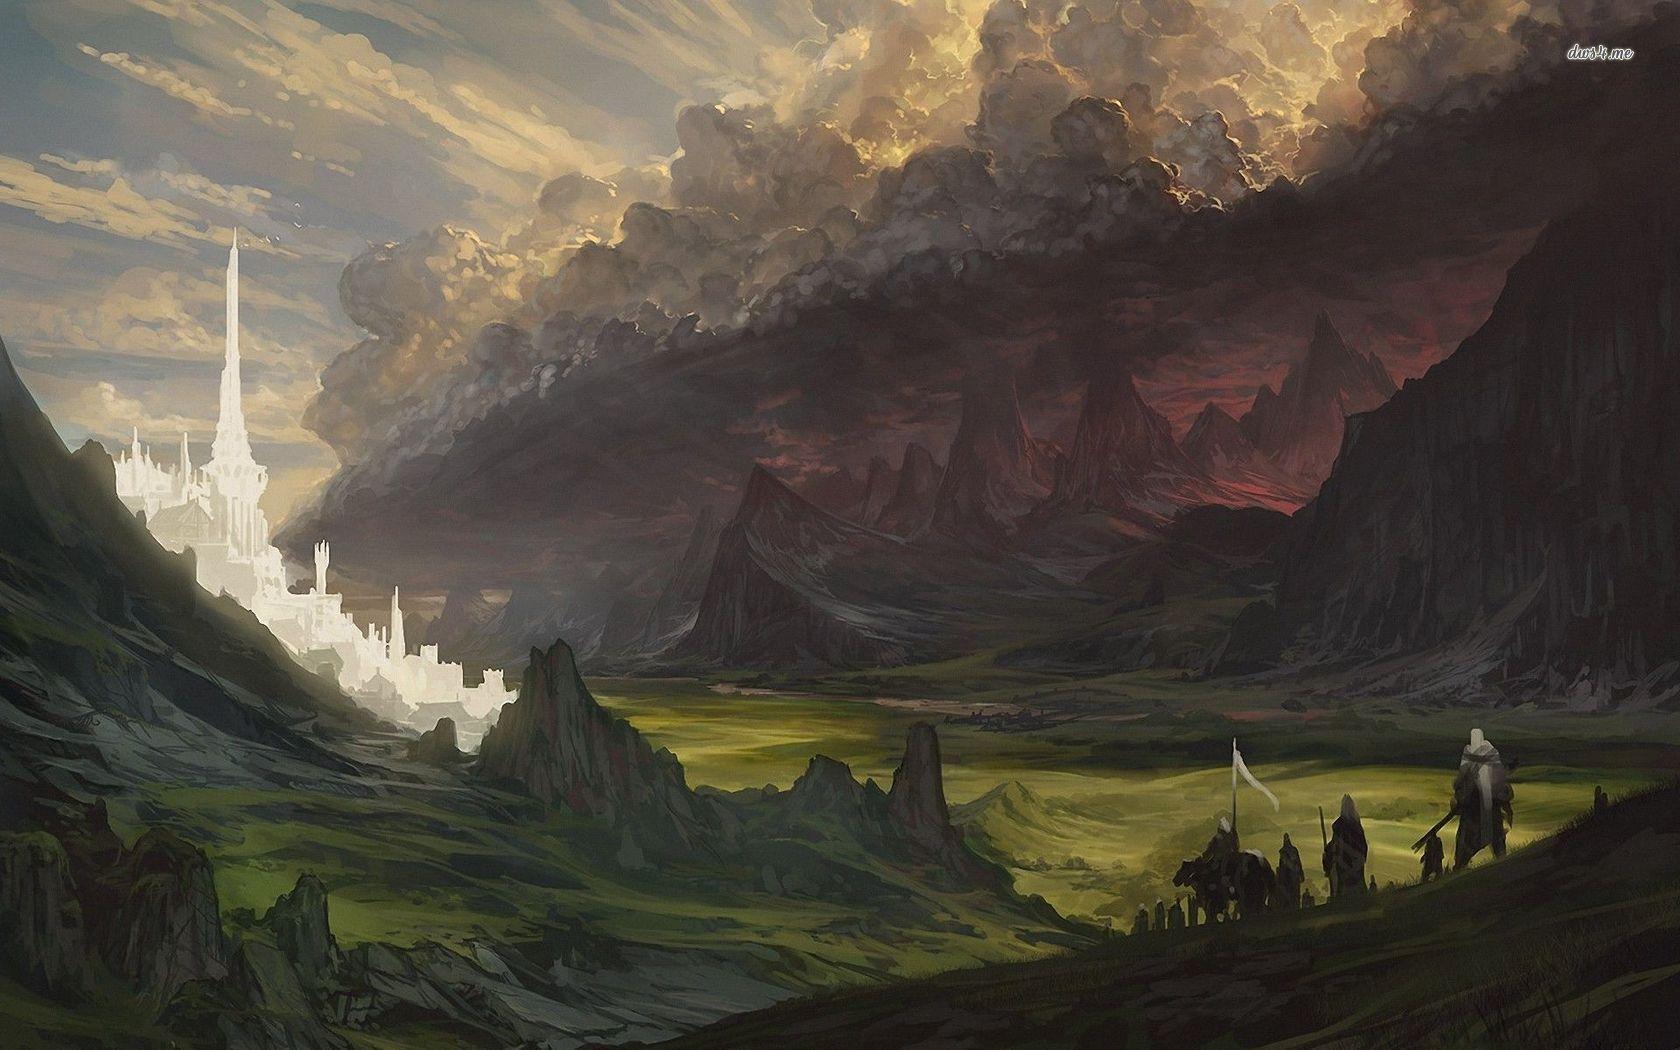 Lord Of The Rings Art Wallpapers Top, Lord Of The Rings Landscape Art